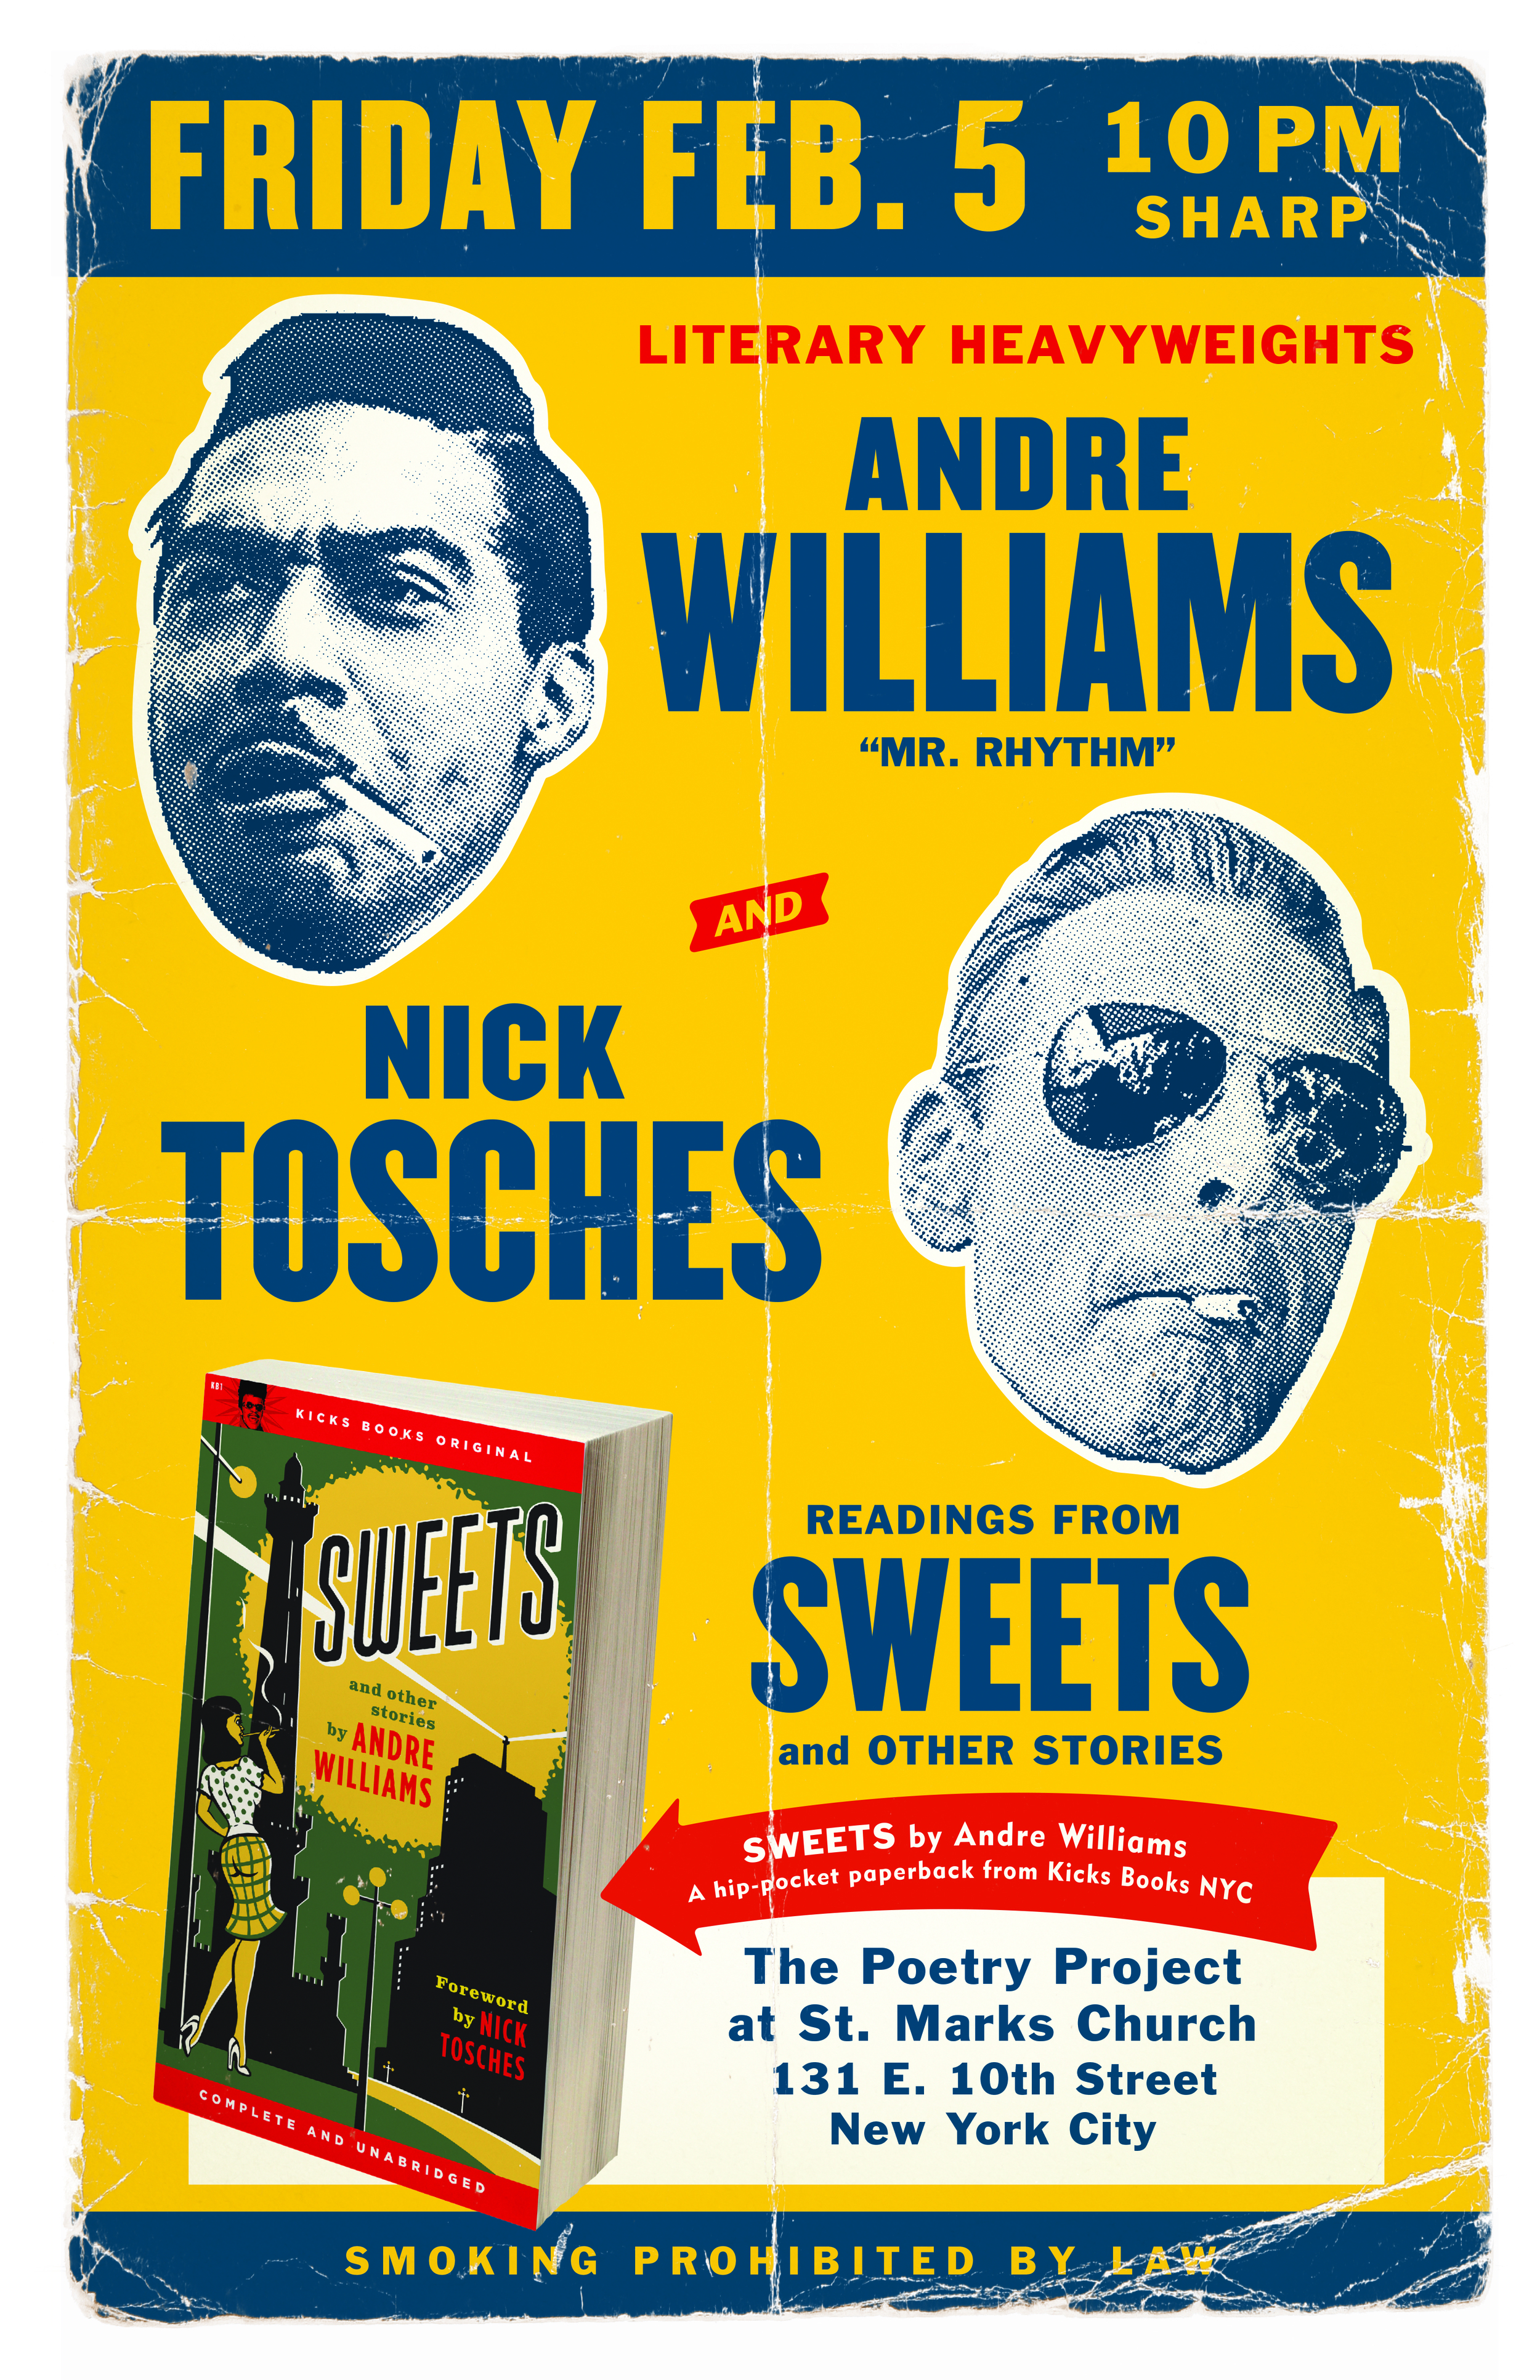 Andre Williams/Nick Tosches reading poster